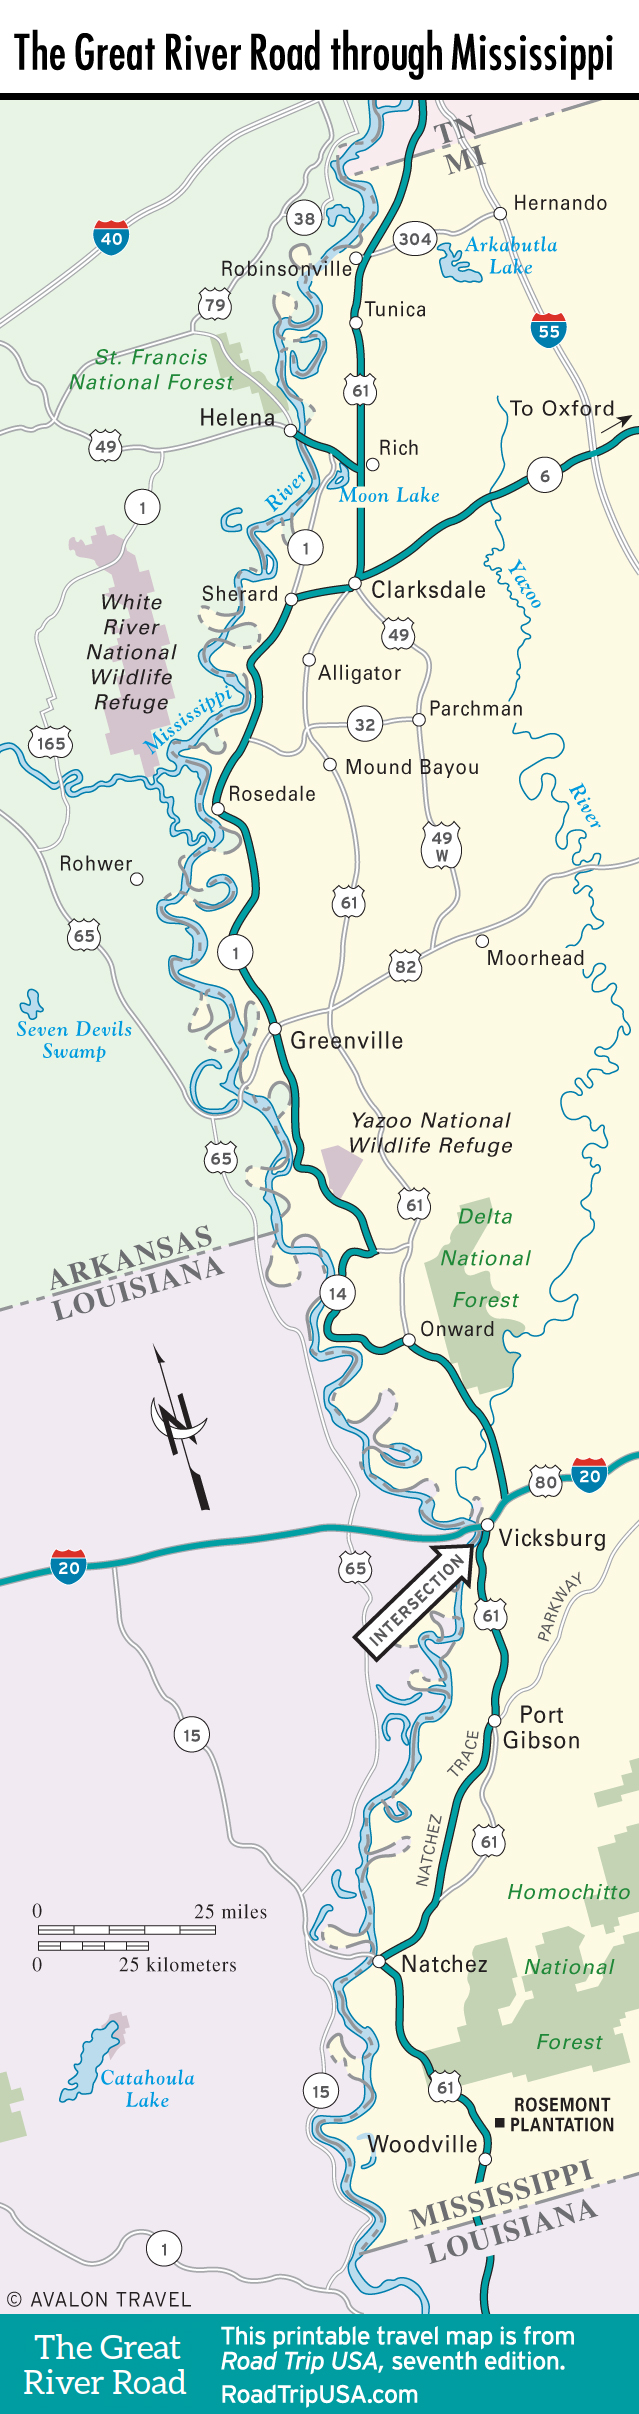 Highway 61 – The Great River Road in Mississippi